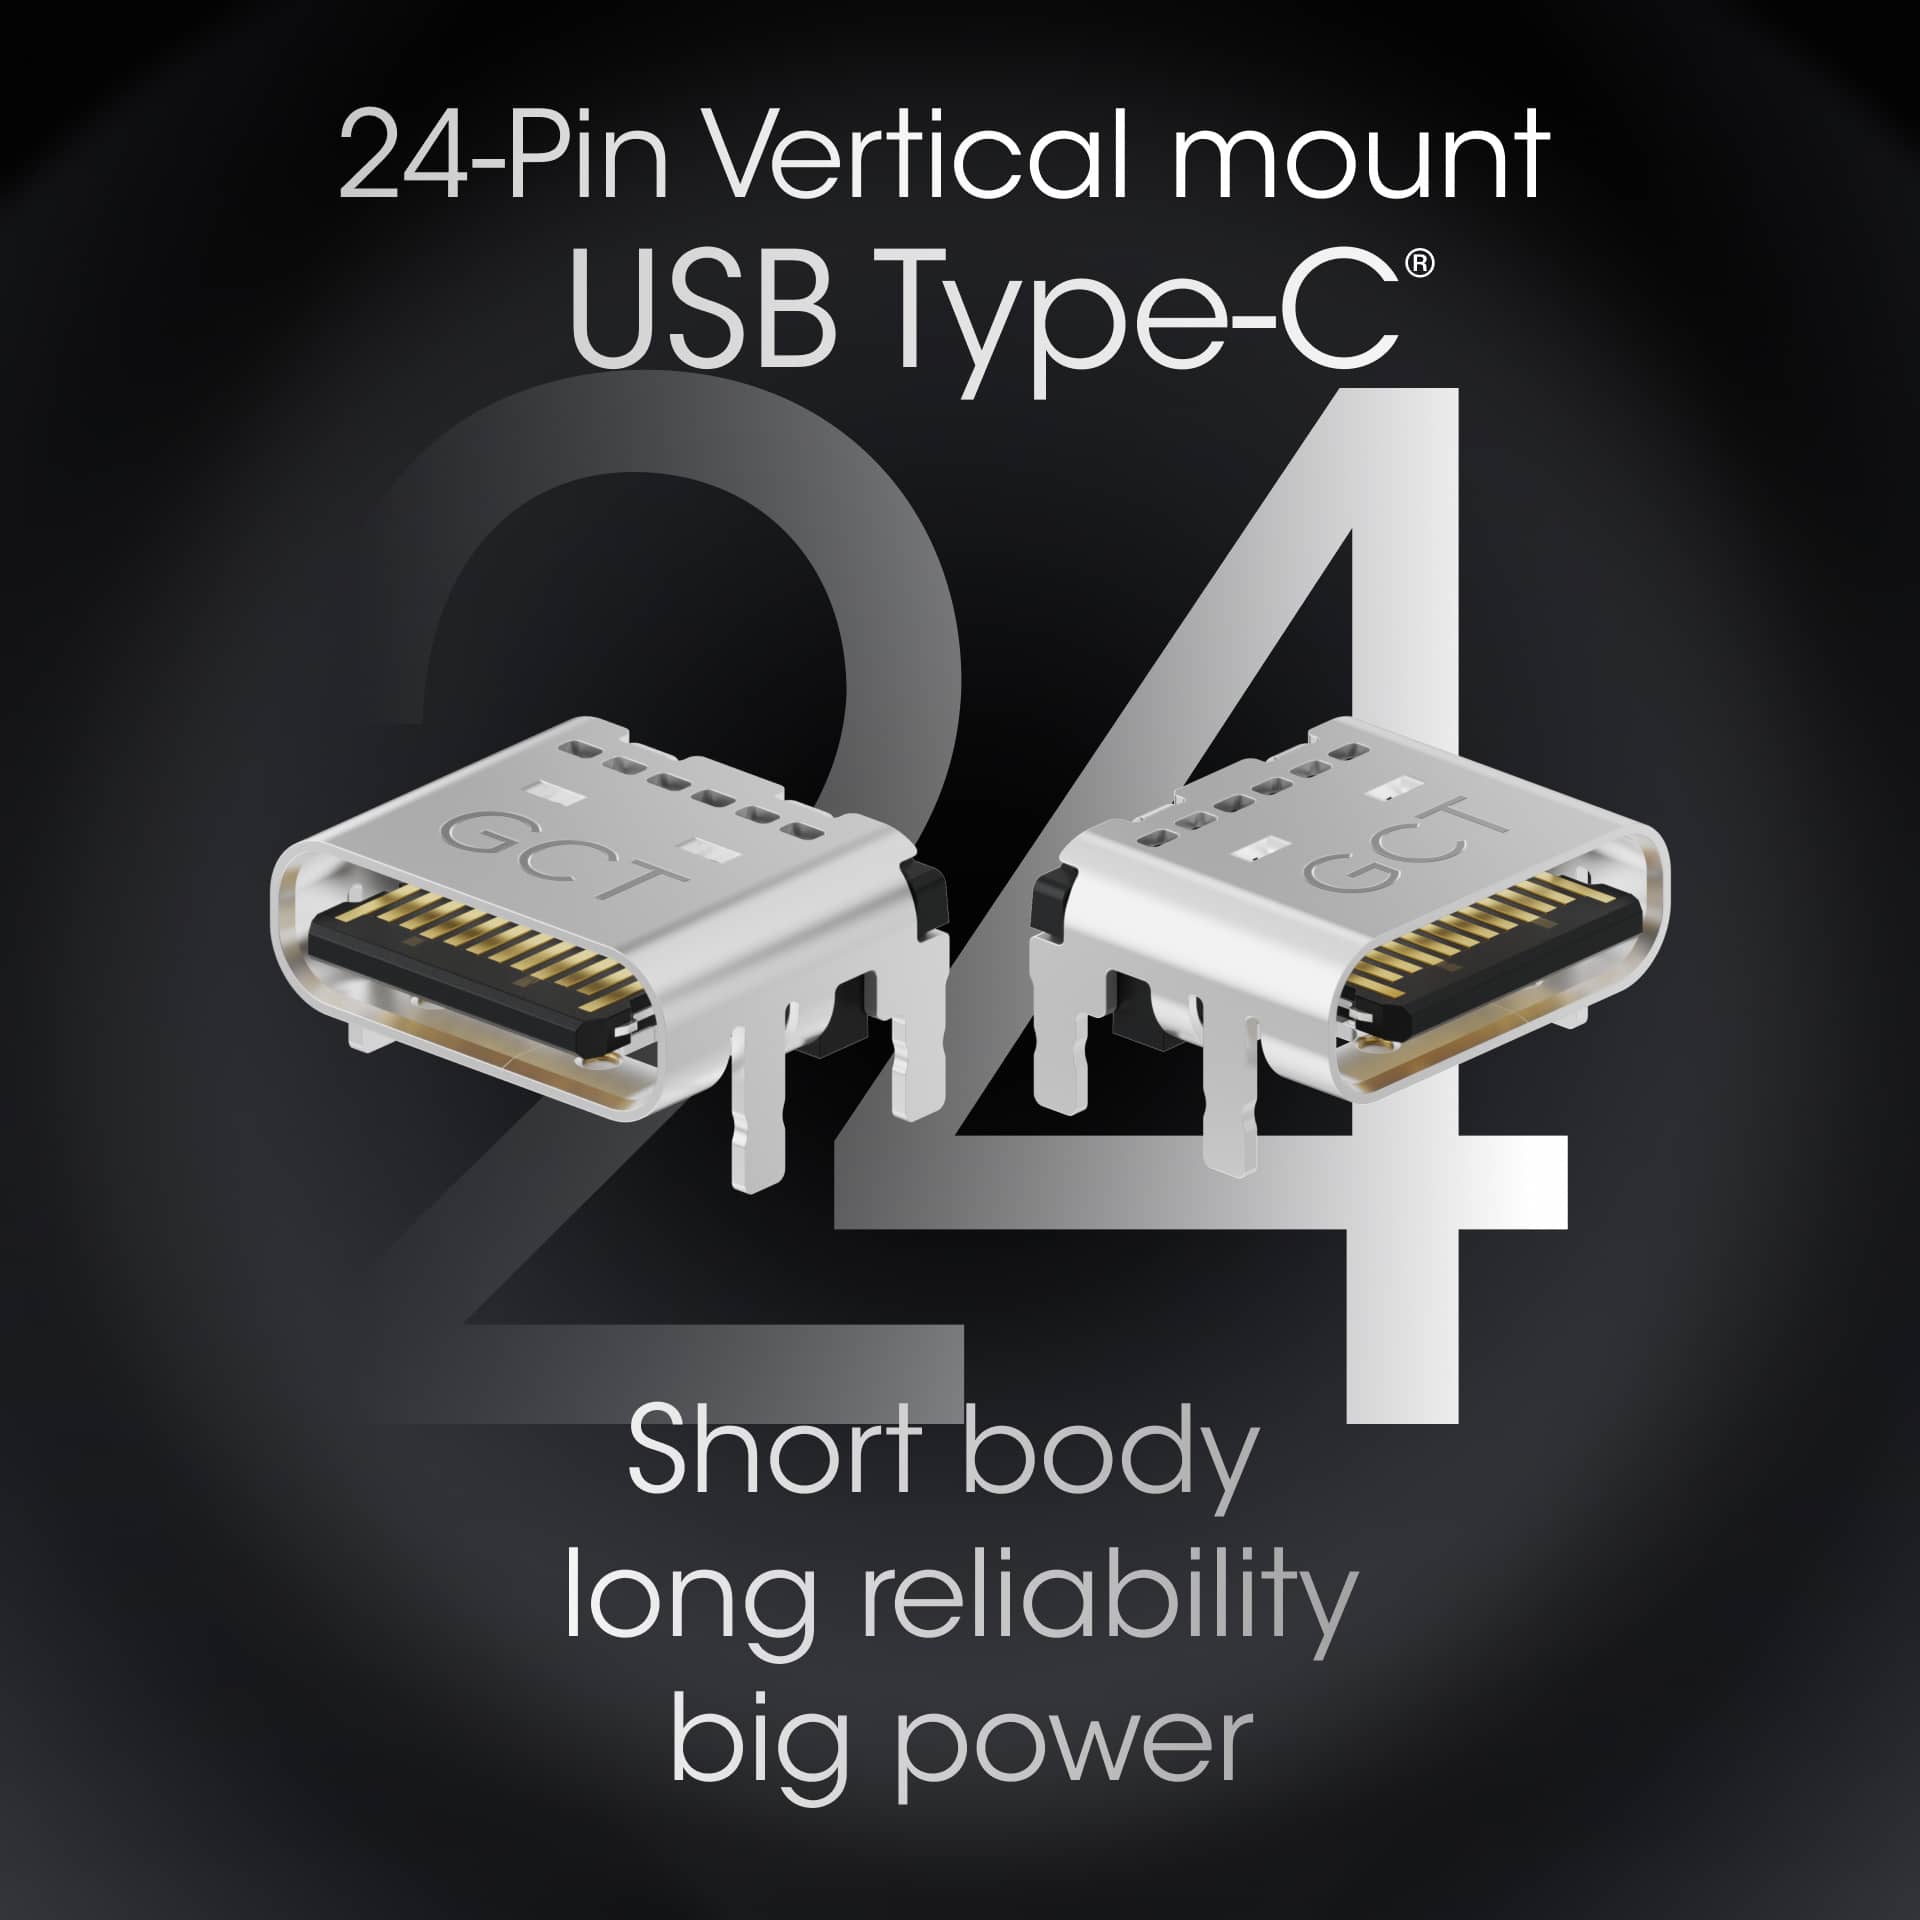 USB4081 Type-c 3.2 Gen 2 with only 7.05mm length